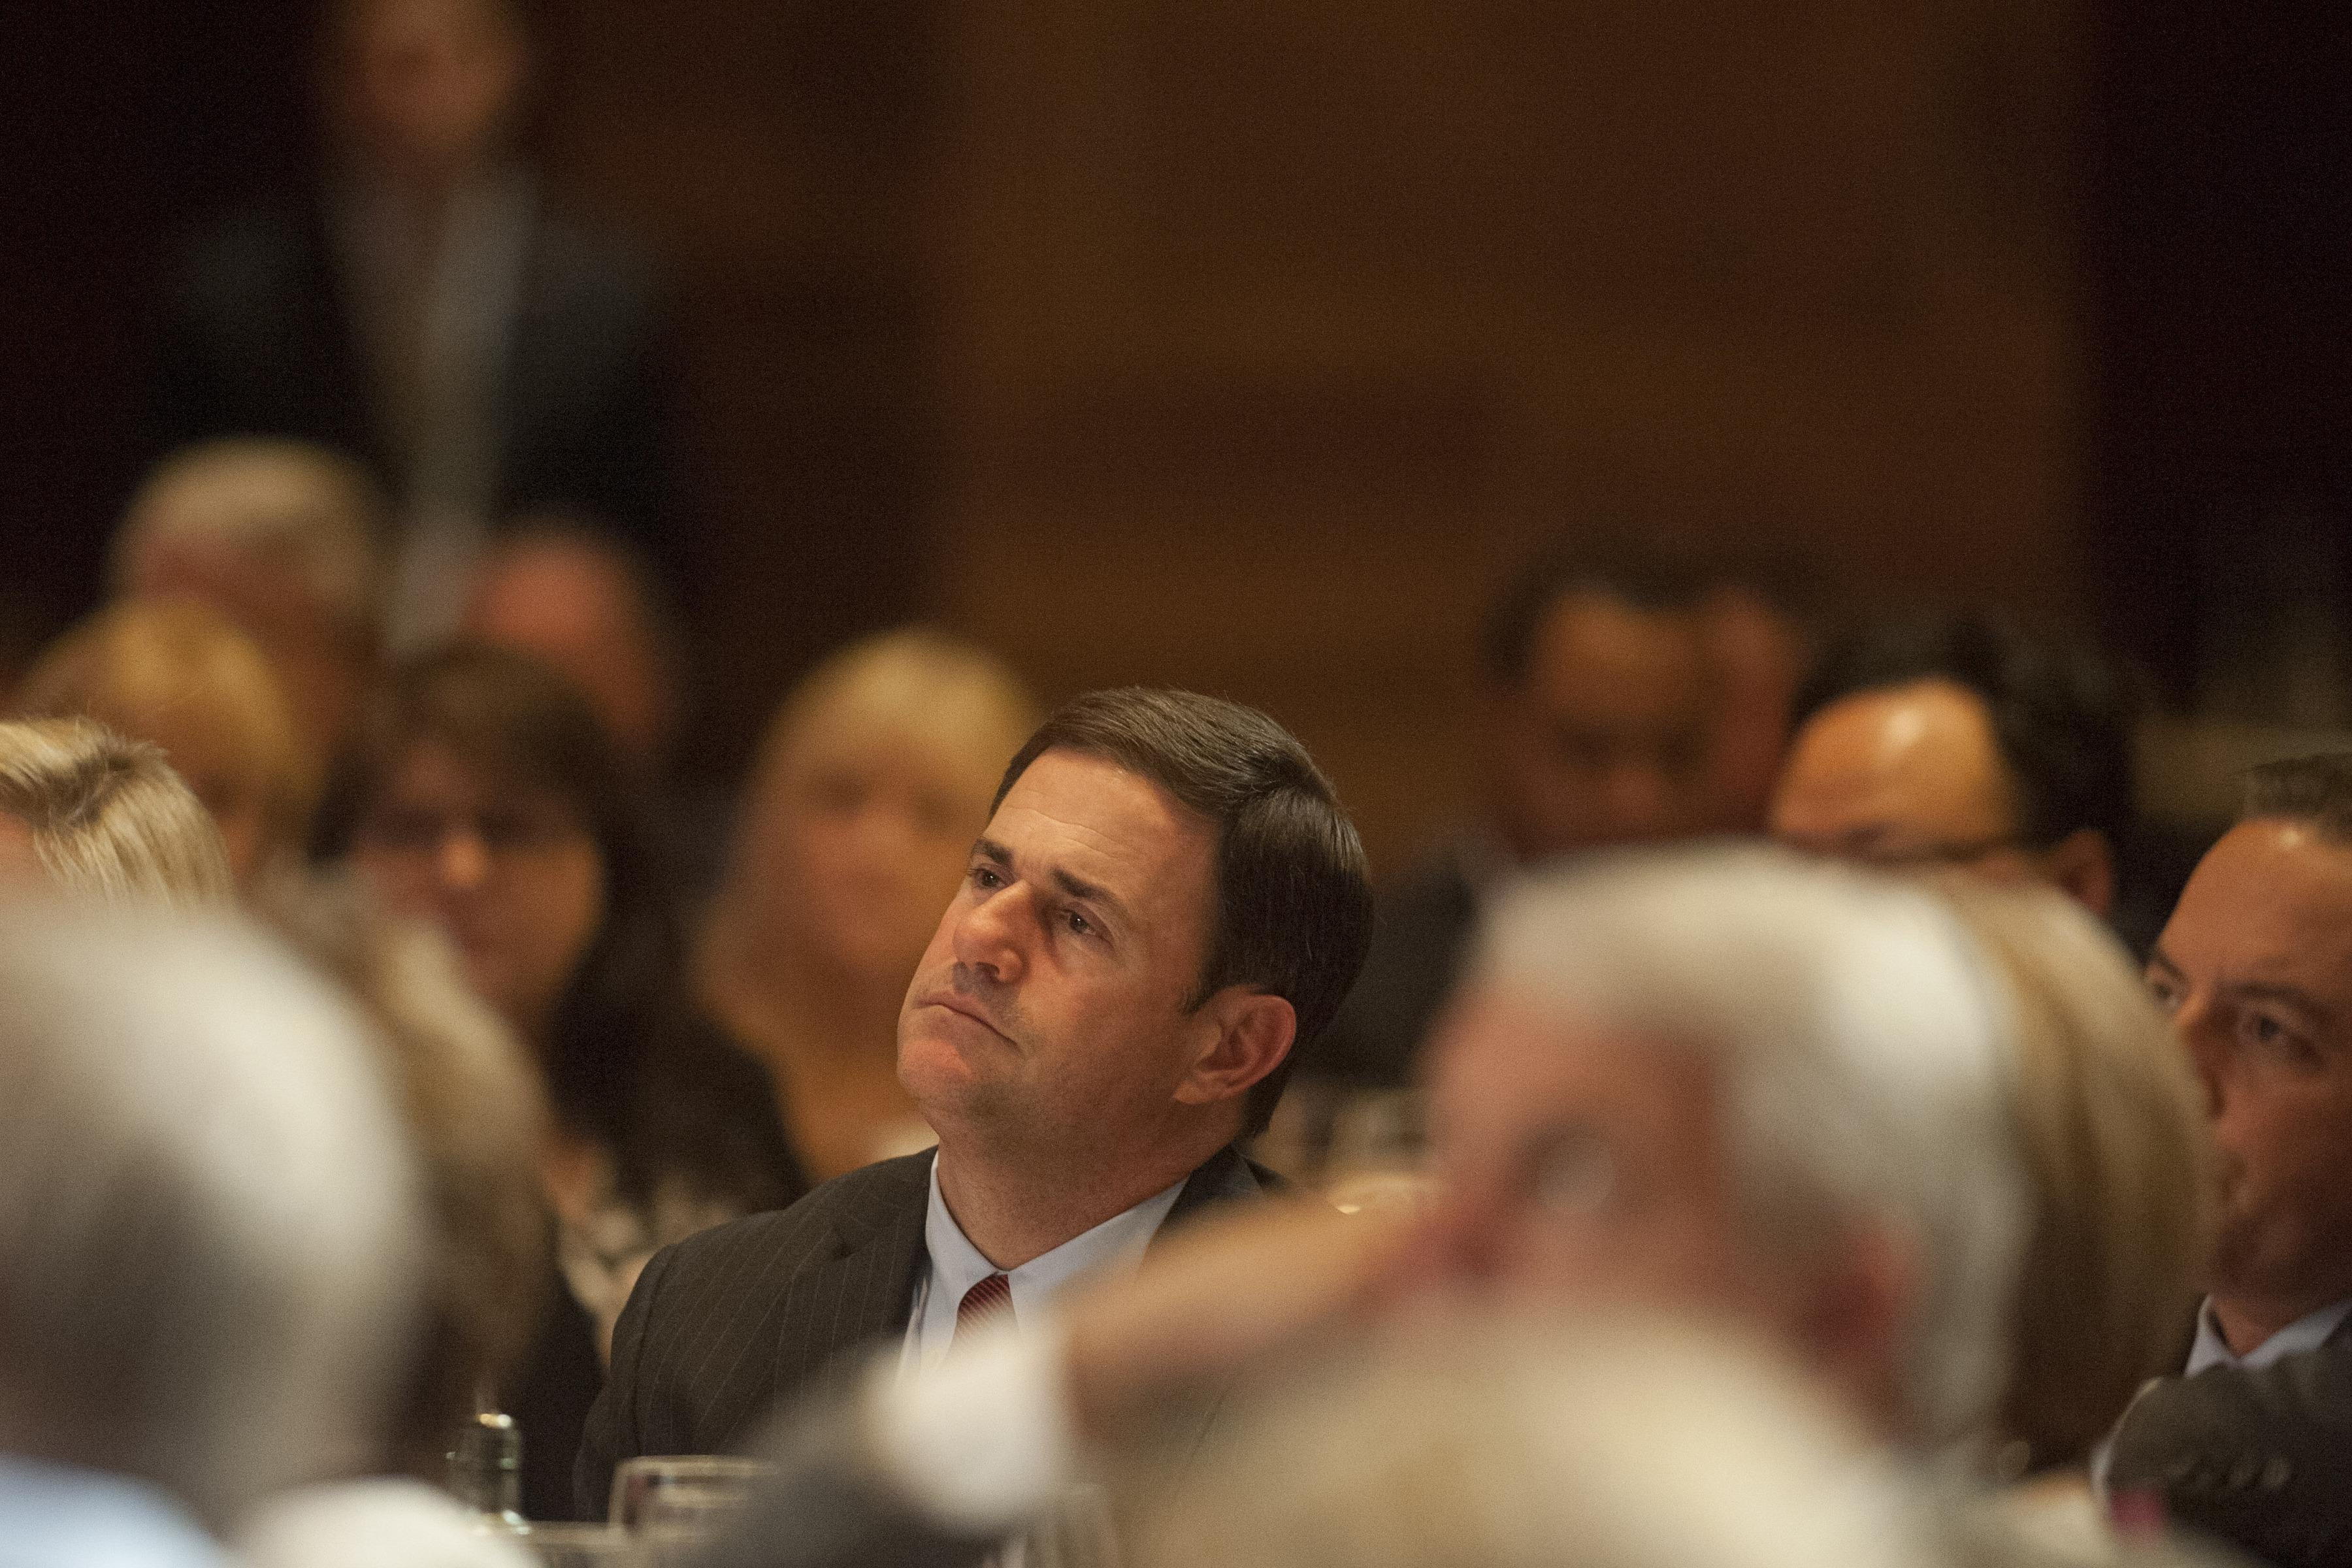 SCOTTSDALE, AZ  - MAY  14:  Arizona Gov. Doug Ducey listens as former Florida Gov. Jeb Bush speaks at a dinner during the Republican National Committee Spring Meeting  at The Phoenician  May 14, 2015 in Scottsdale, Arizona. Bush, brother of former President George W. Bush and son of former President George H.W. Bush, is widely expected to run for the Republican nomination for president in 2016.  (Photo by Laura Segall/Getty Images)